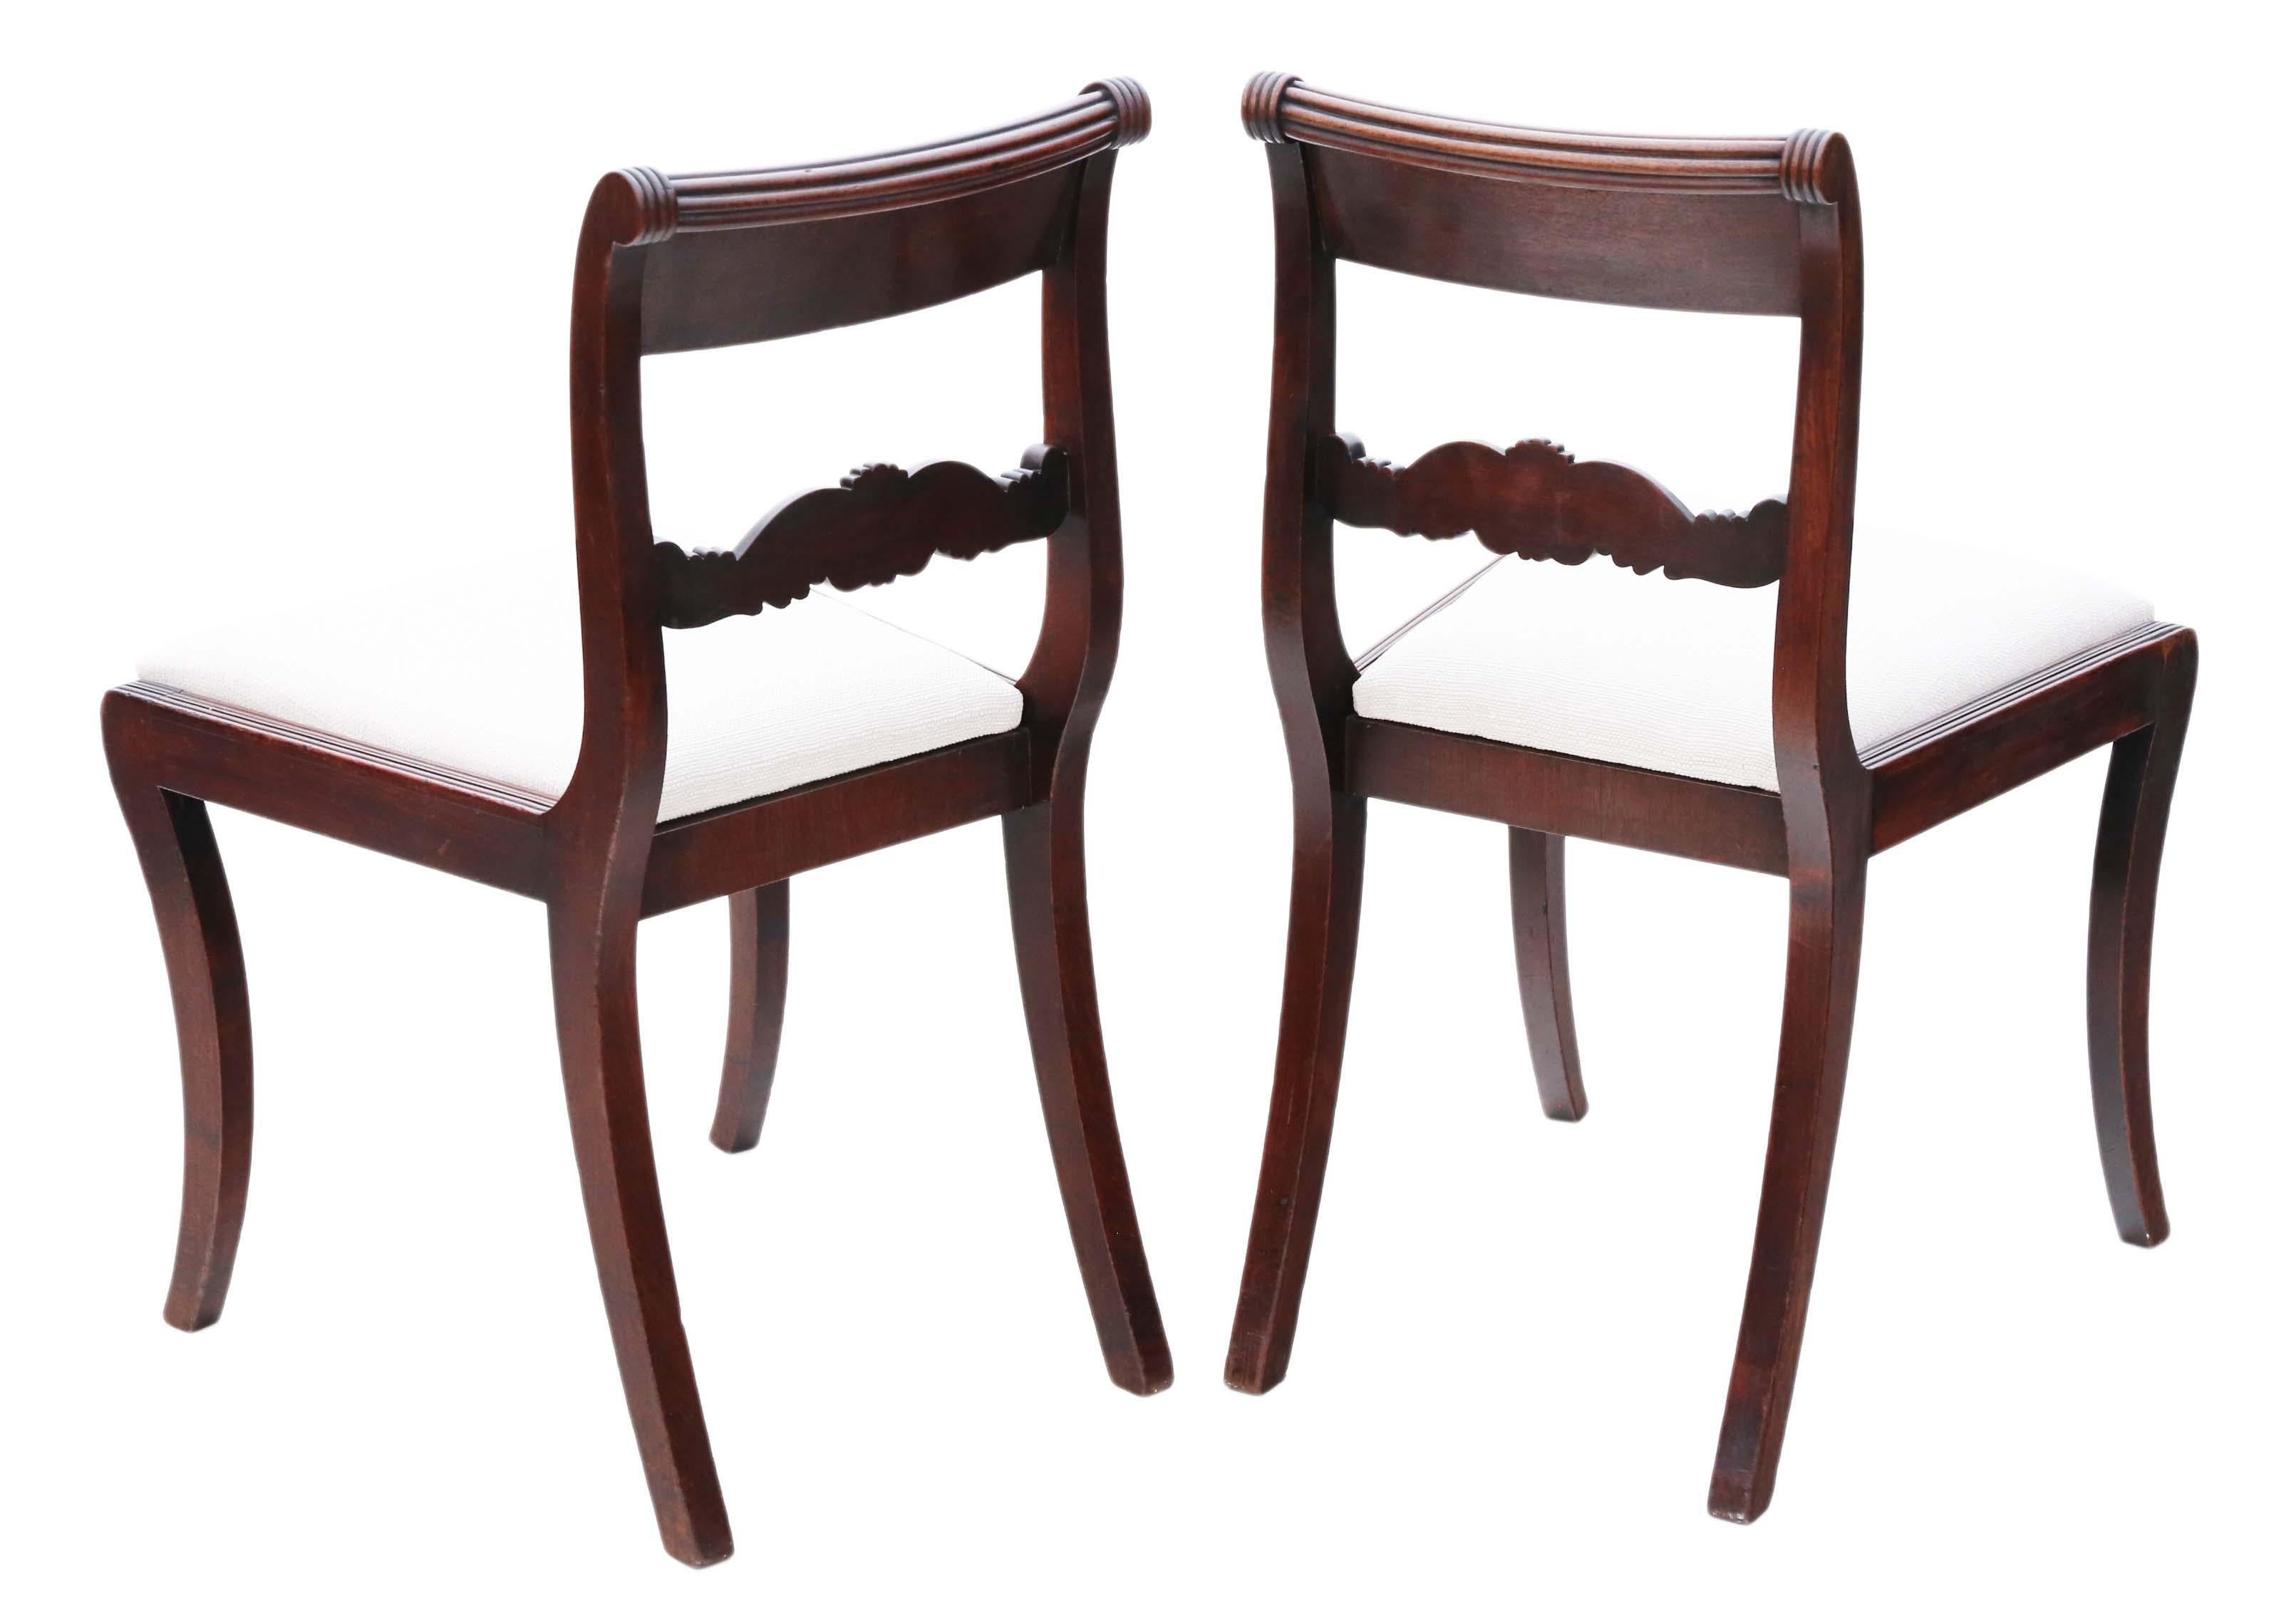 Antique quality pair of Regency 19th century mahogany dining side hall or bedroom chairs.

Date from circa 1825.

Solid, with no loose joints and no woodworm.

New upholstery in a heavy weight upholstery fabric, with an off-white